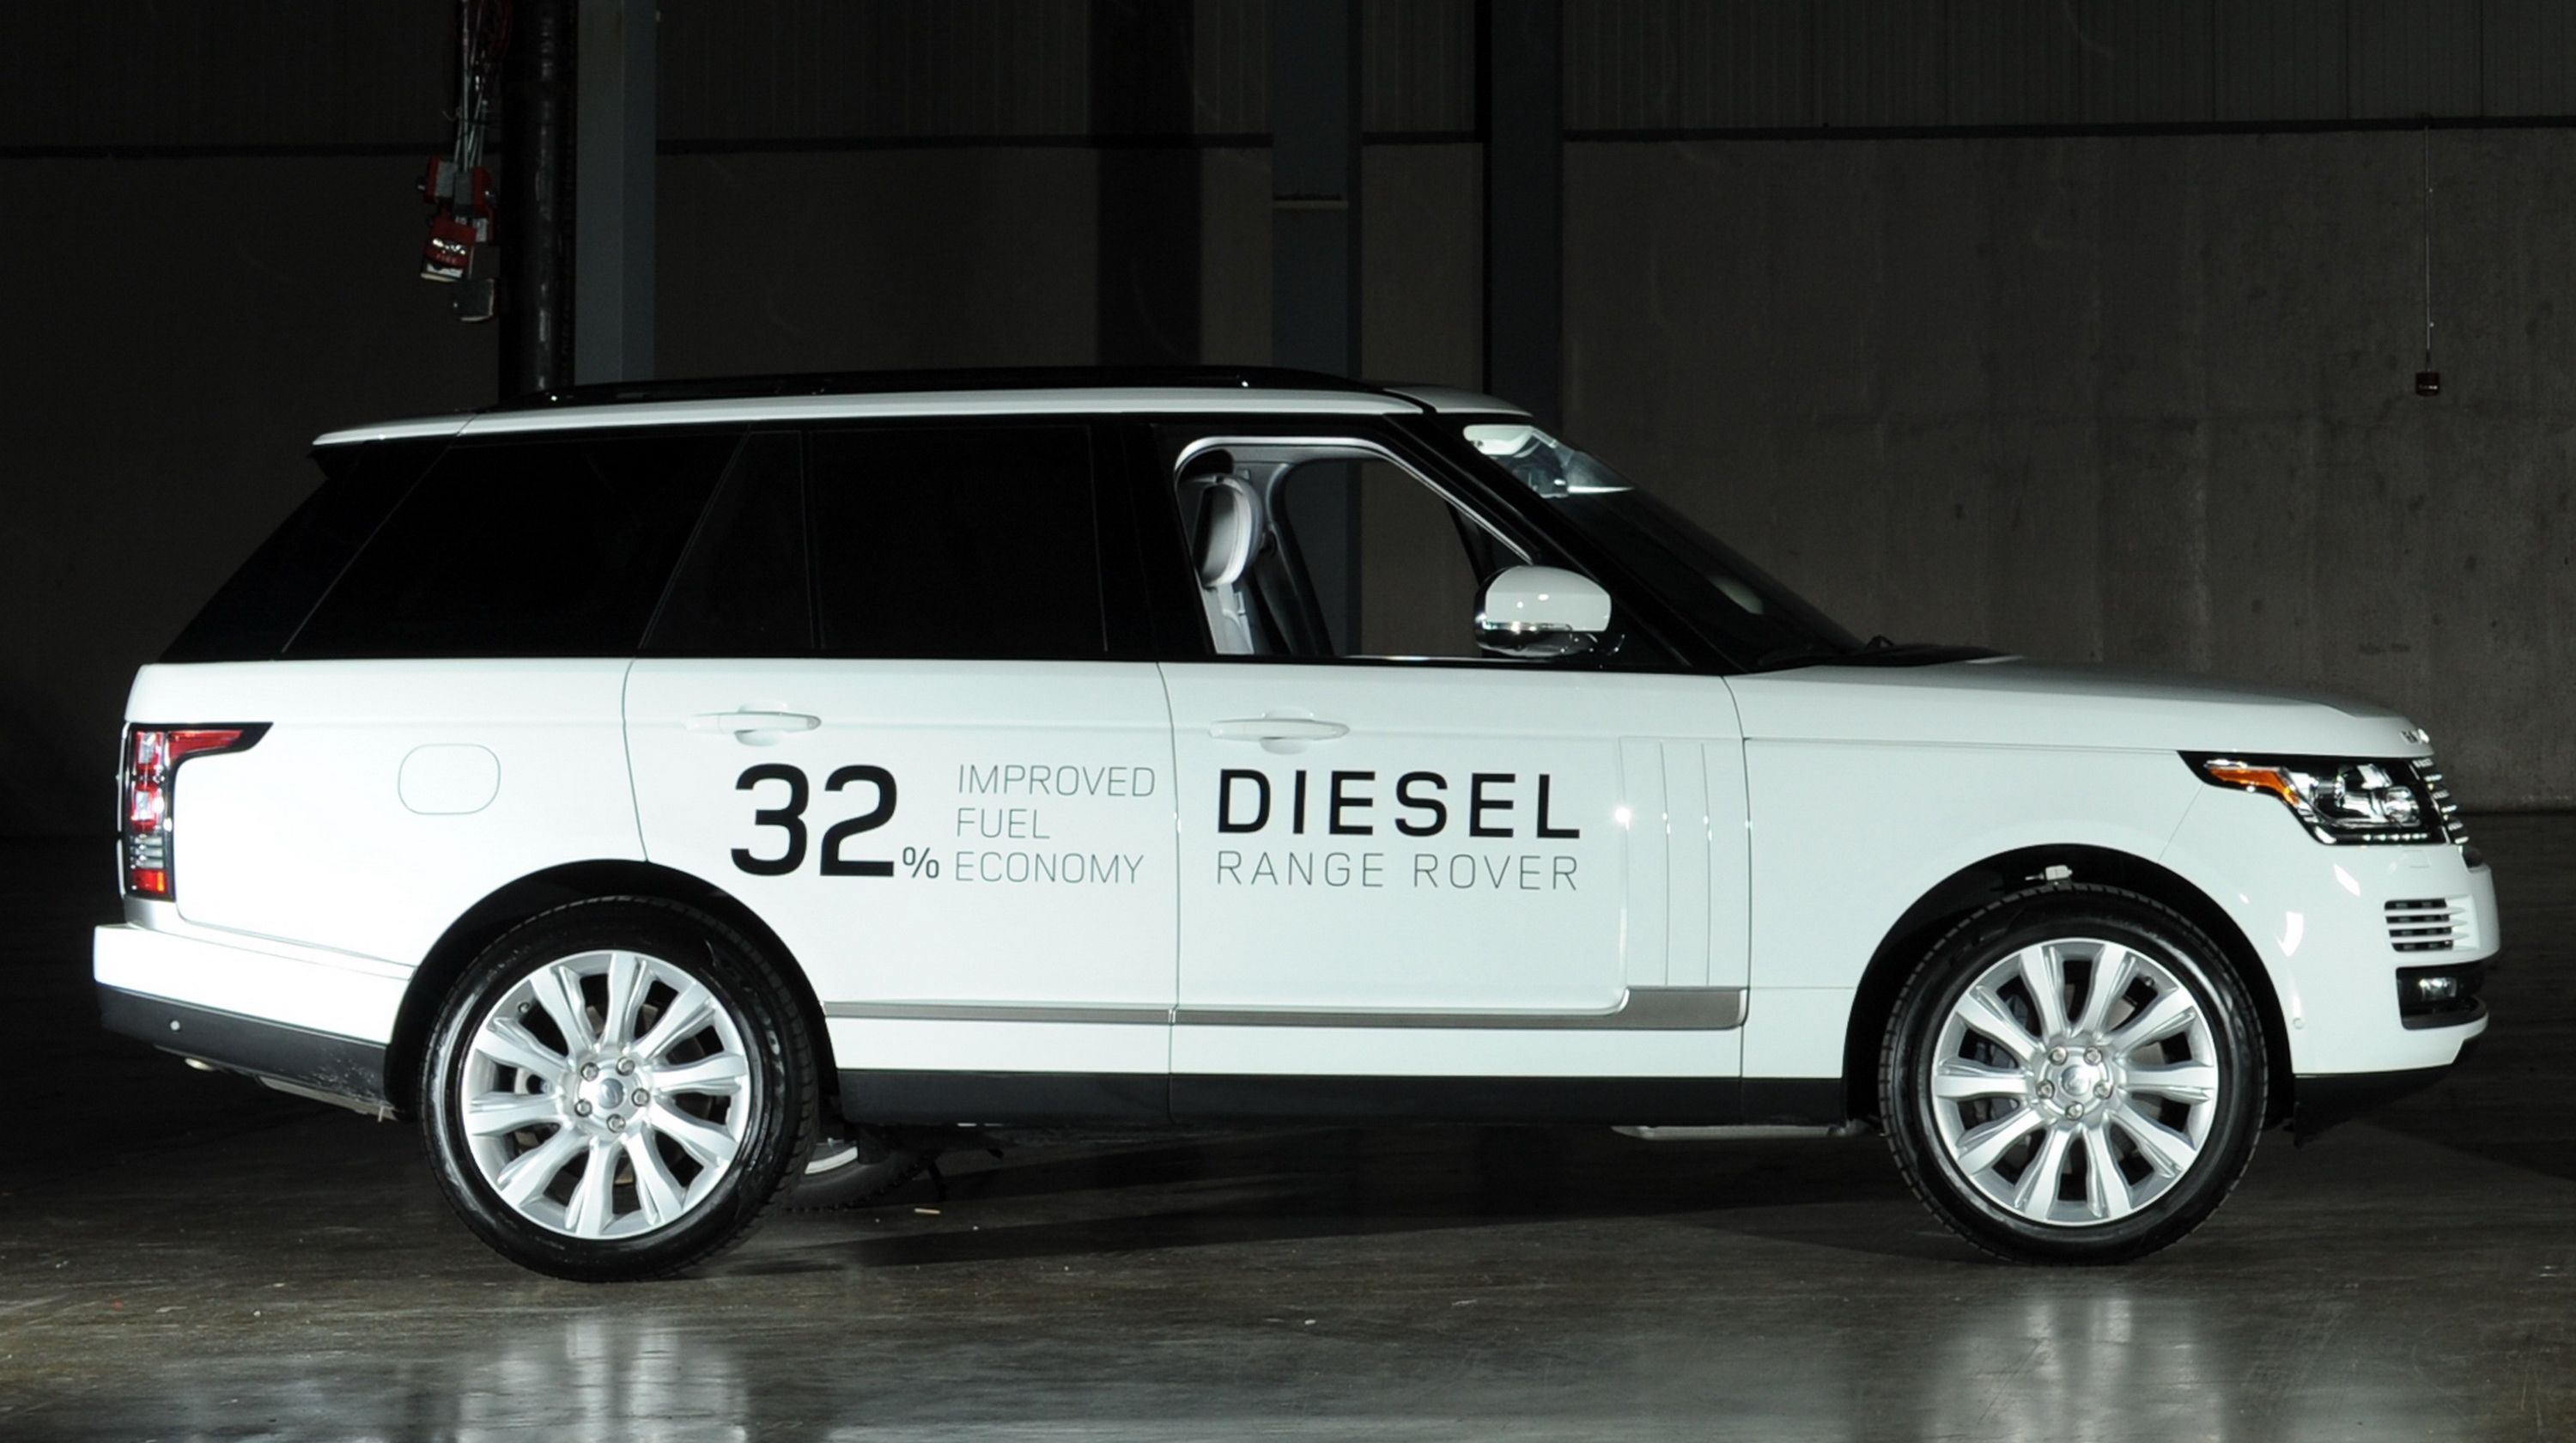  Diesel power may not be a huge seller in the U.S., but it's growth is outpacing the rest of the automotive world by a huge margin. Apparently Land Rover is paying attention and is releasing a pair of oil-burners in the U.S.